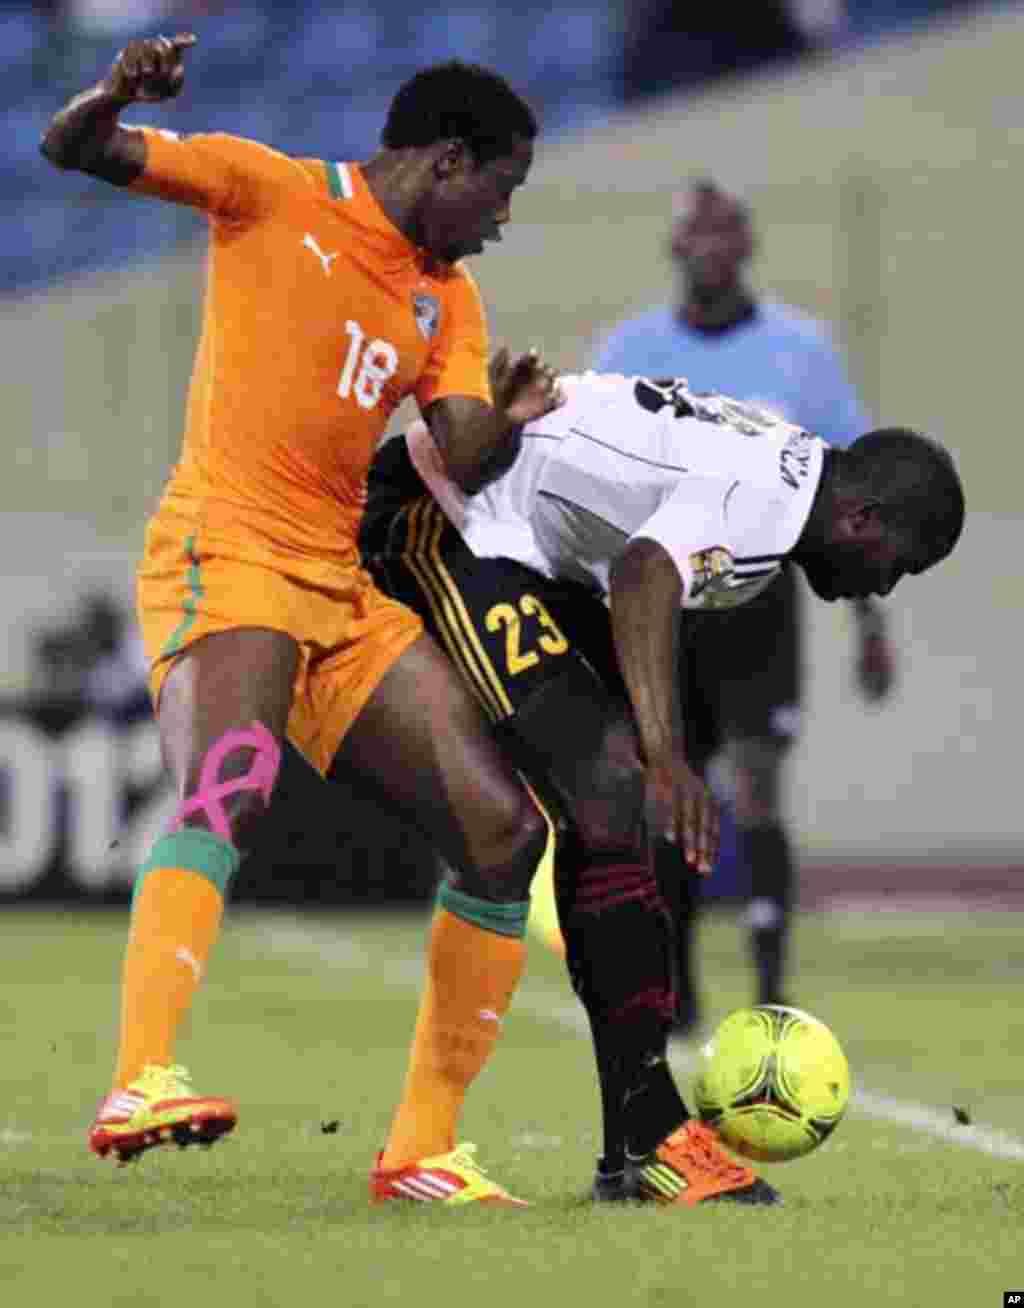 Abdul Kader Keita (L) of Ivory Coast fights for the ball with Jose Pierre Vunguidica of Angola during their African Nations Cup soccer match in Malabo January 30, 2012.